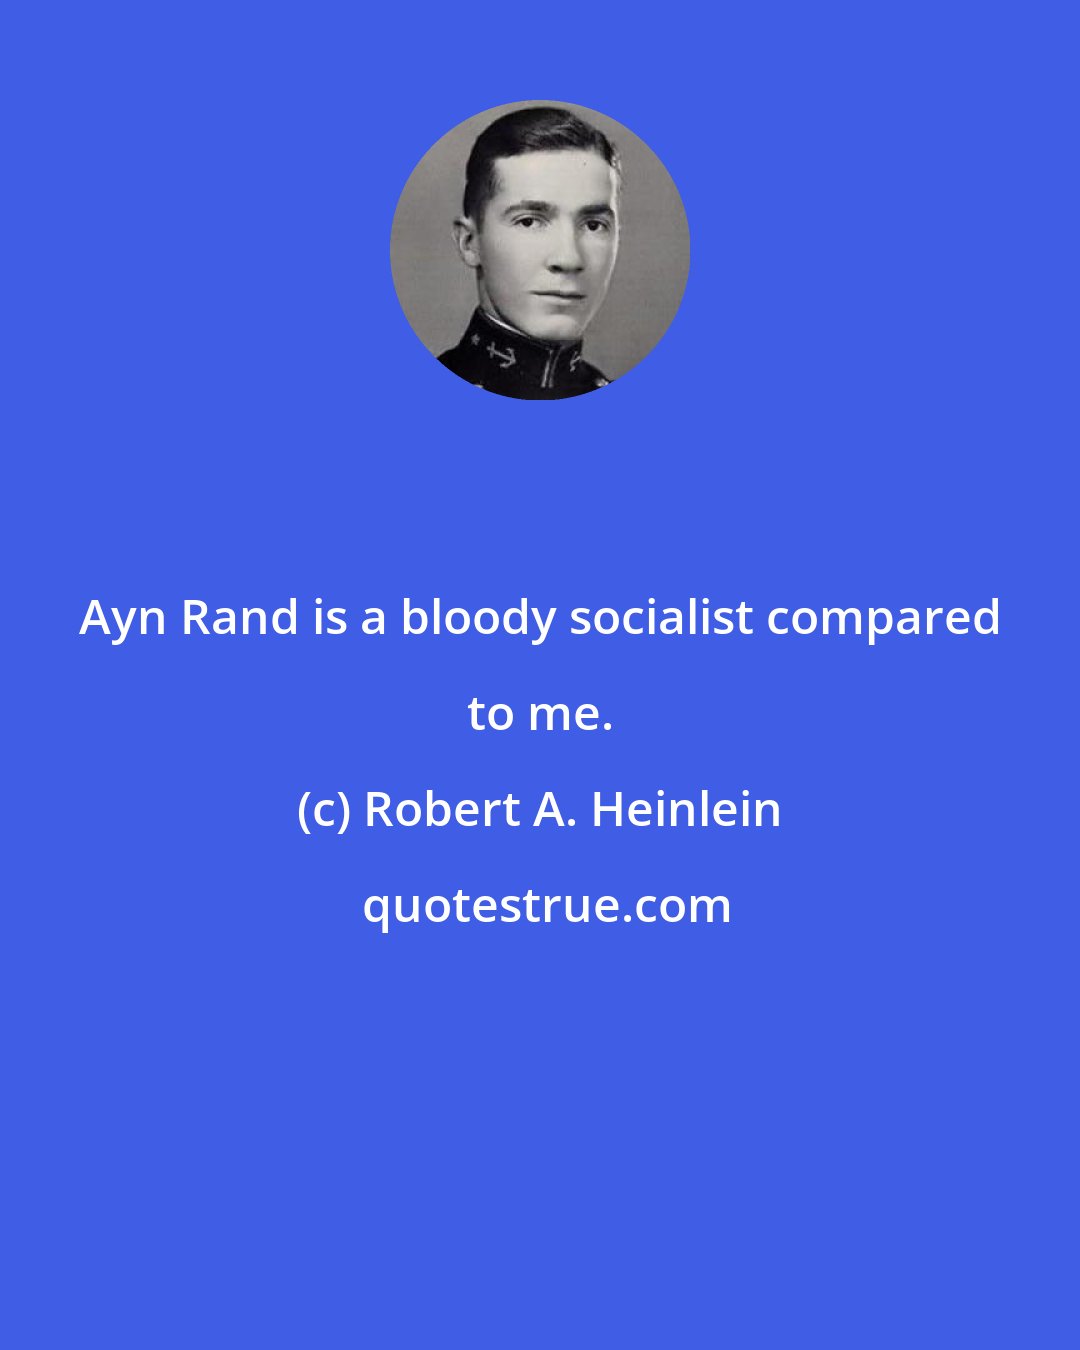 Robert A. Heinlein: Ayn Rand is a bloody socialist compared to me.